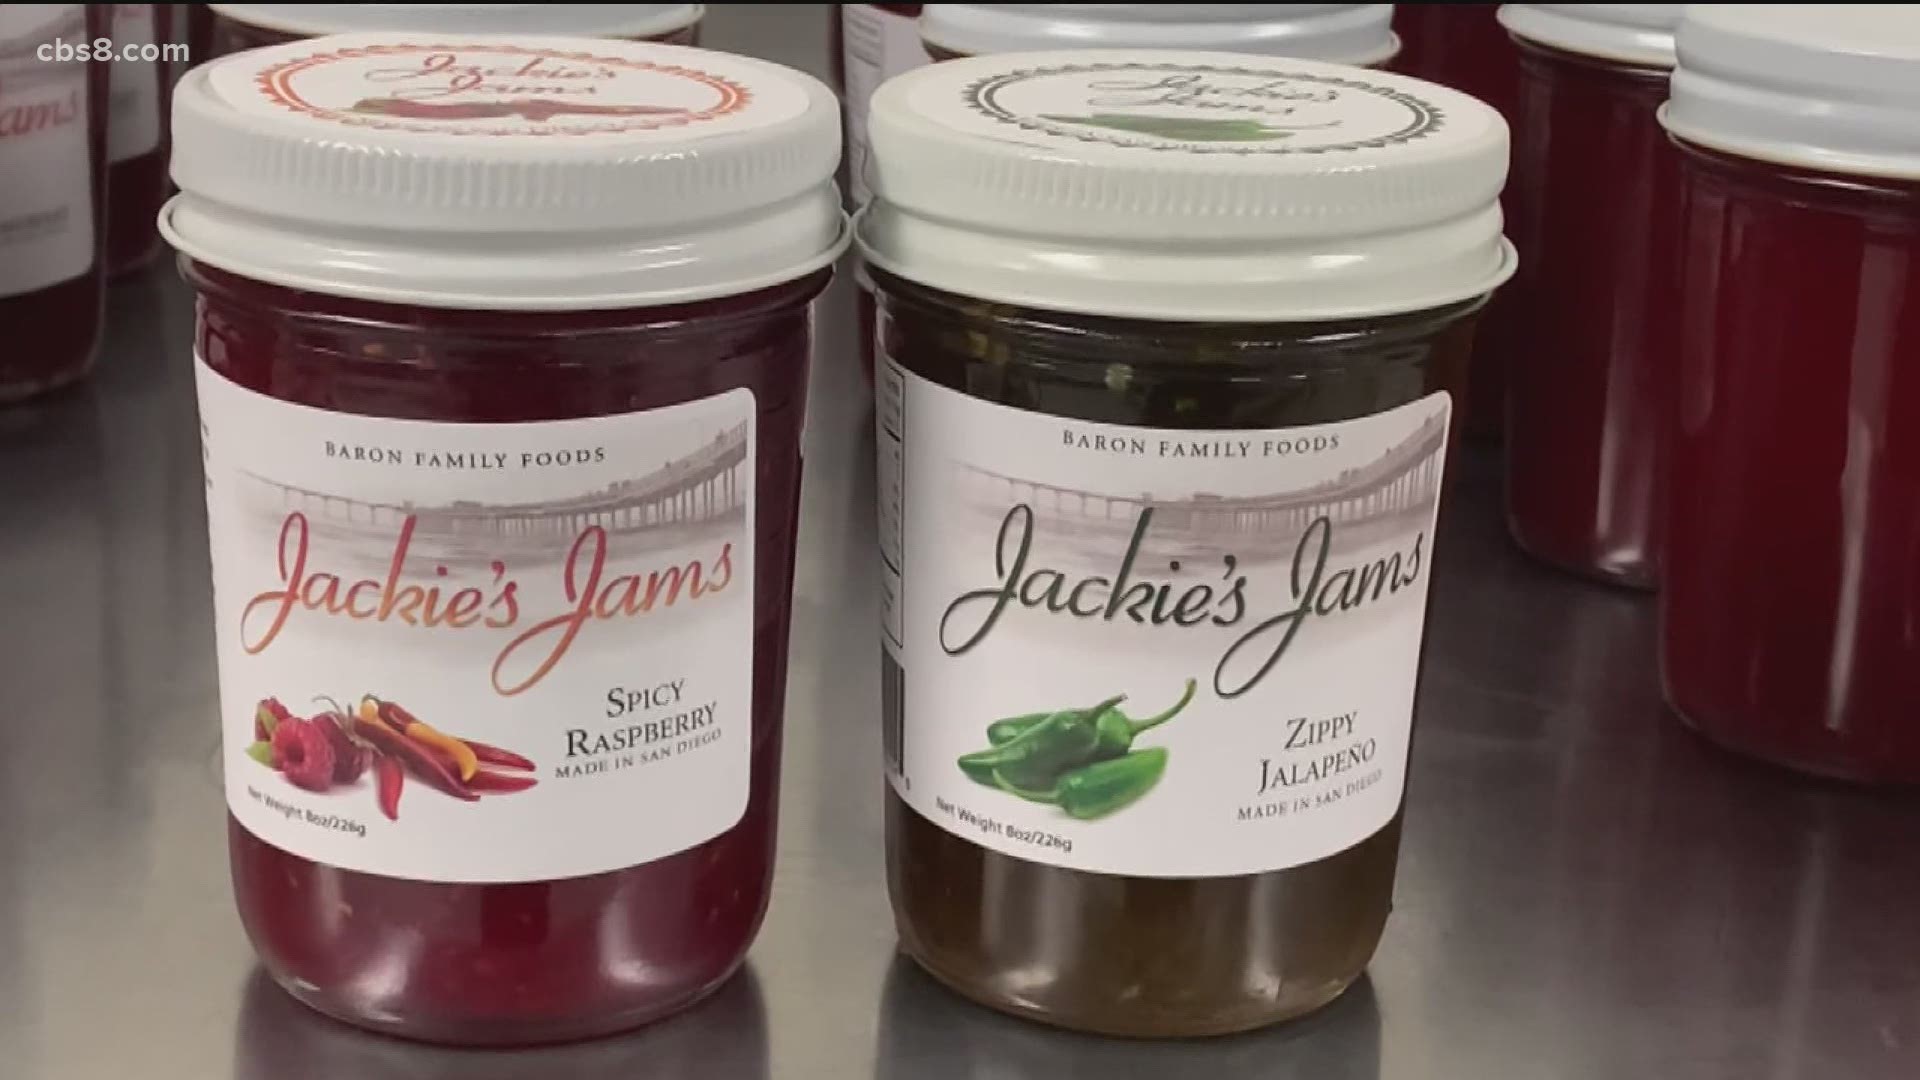 Jackie’s Jams was started by Jackie in the early 2000s as a single stand at the Ocean Beach farmer’s market.  Find out more at www.jackiesjams.com